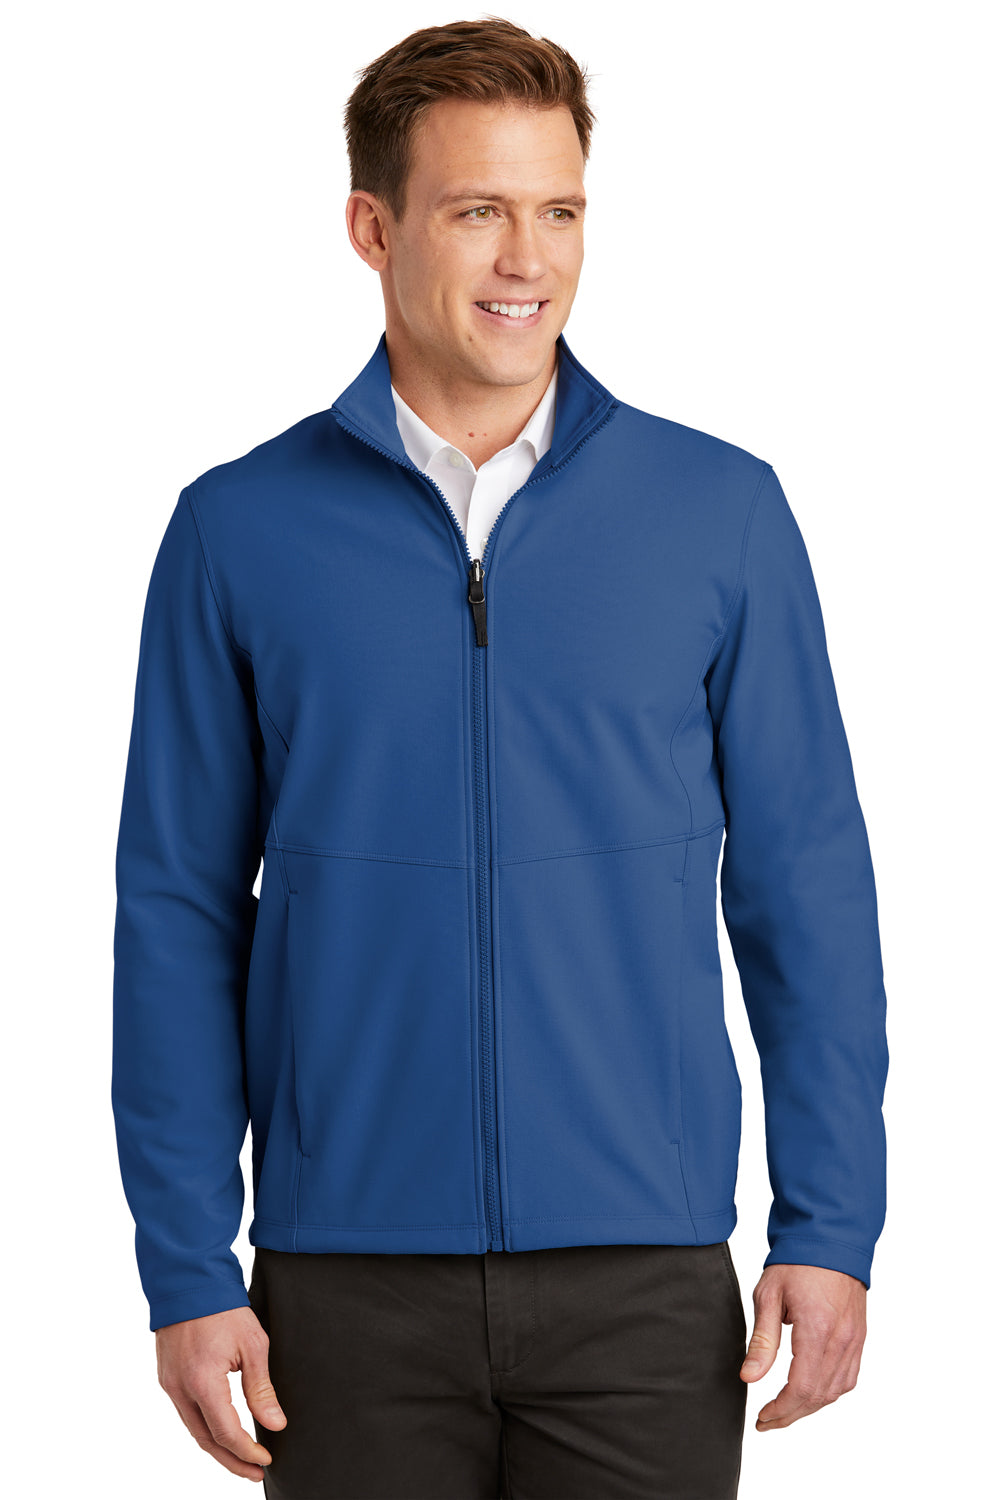 Port Authority J901 Mens Collective Wind & Water Resistant Full Zip Jacket Night Sky Blue Front